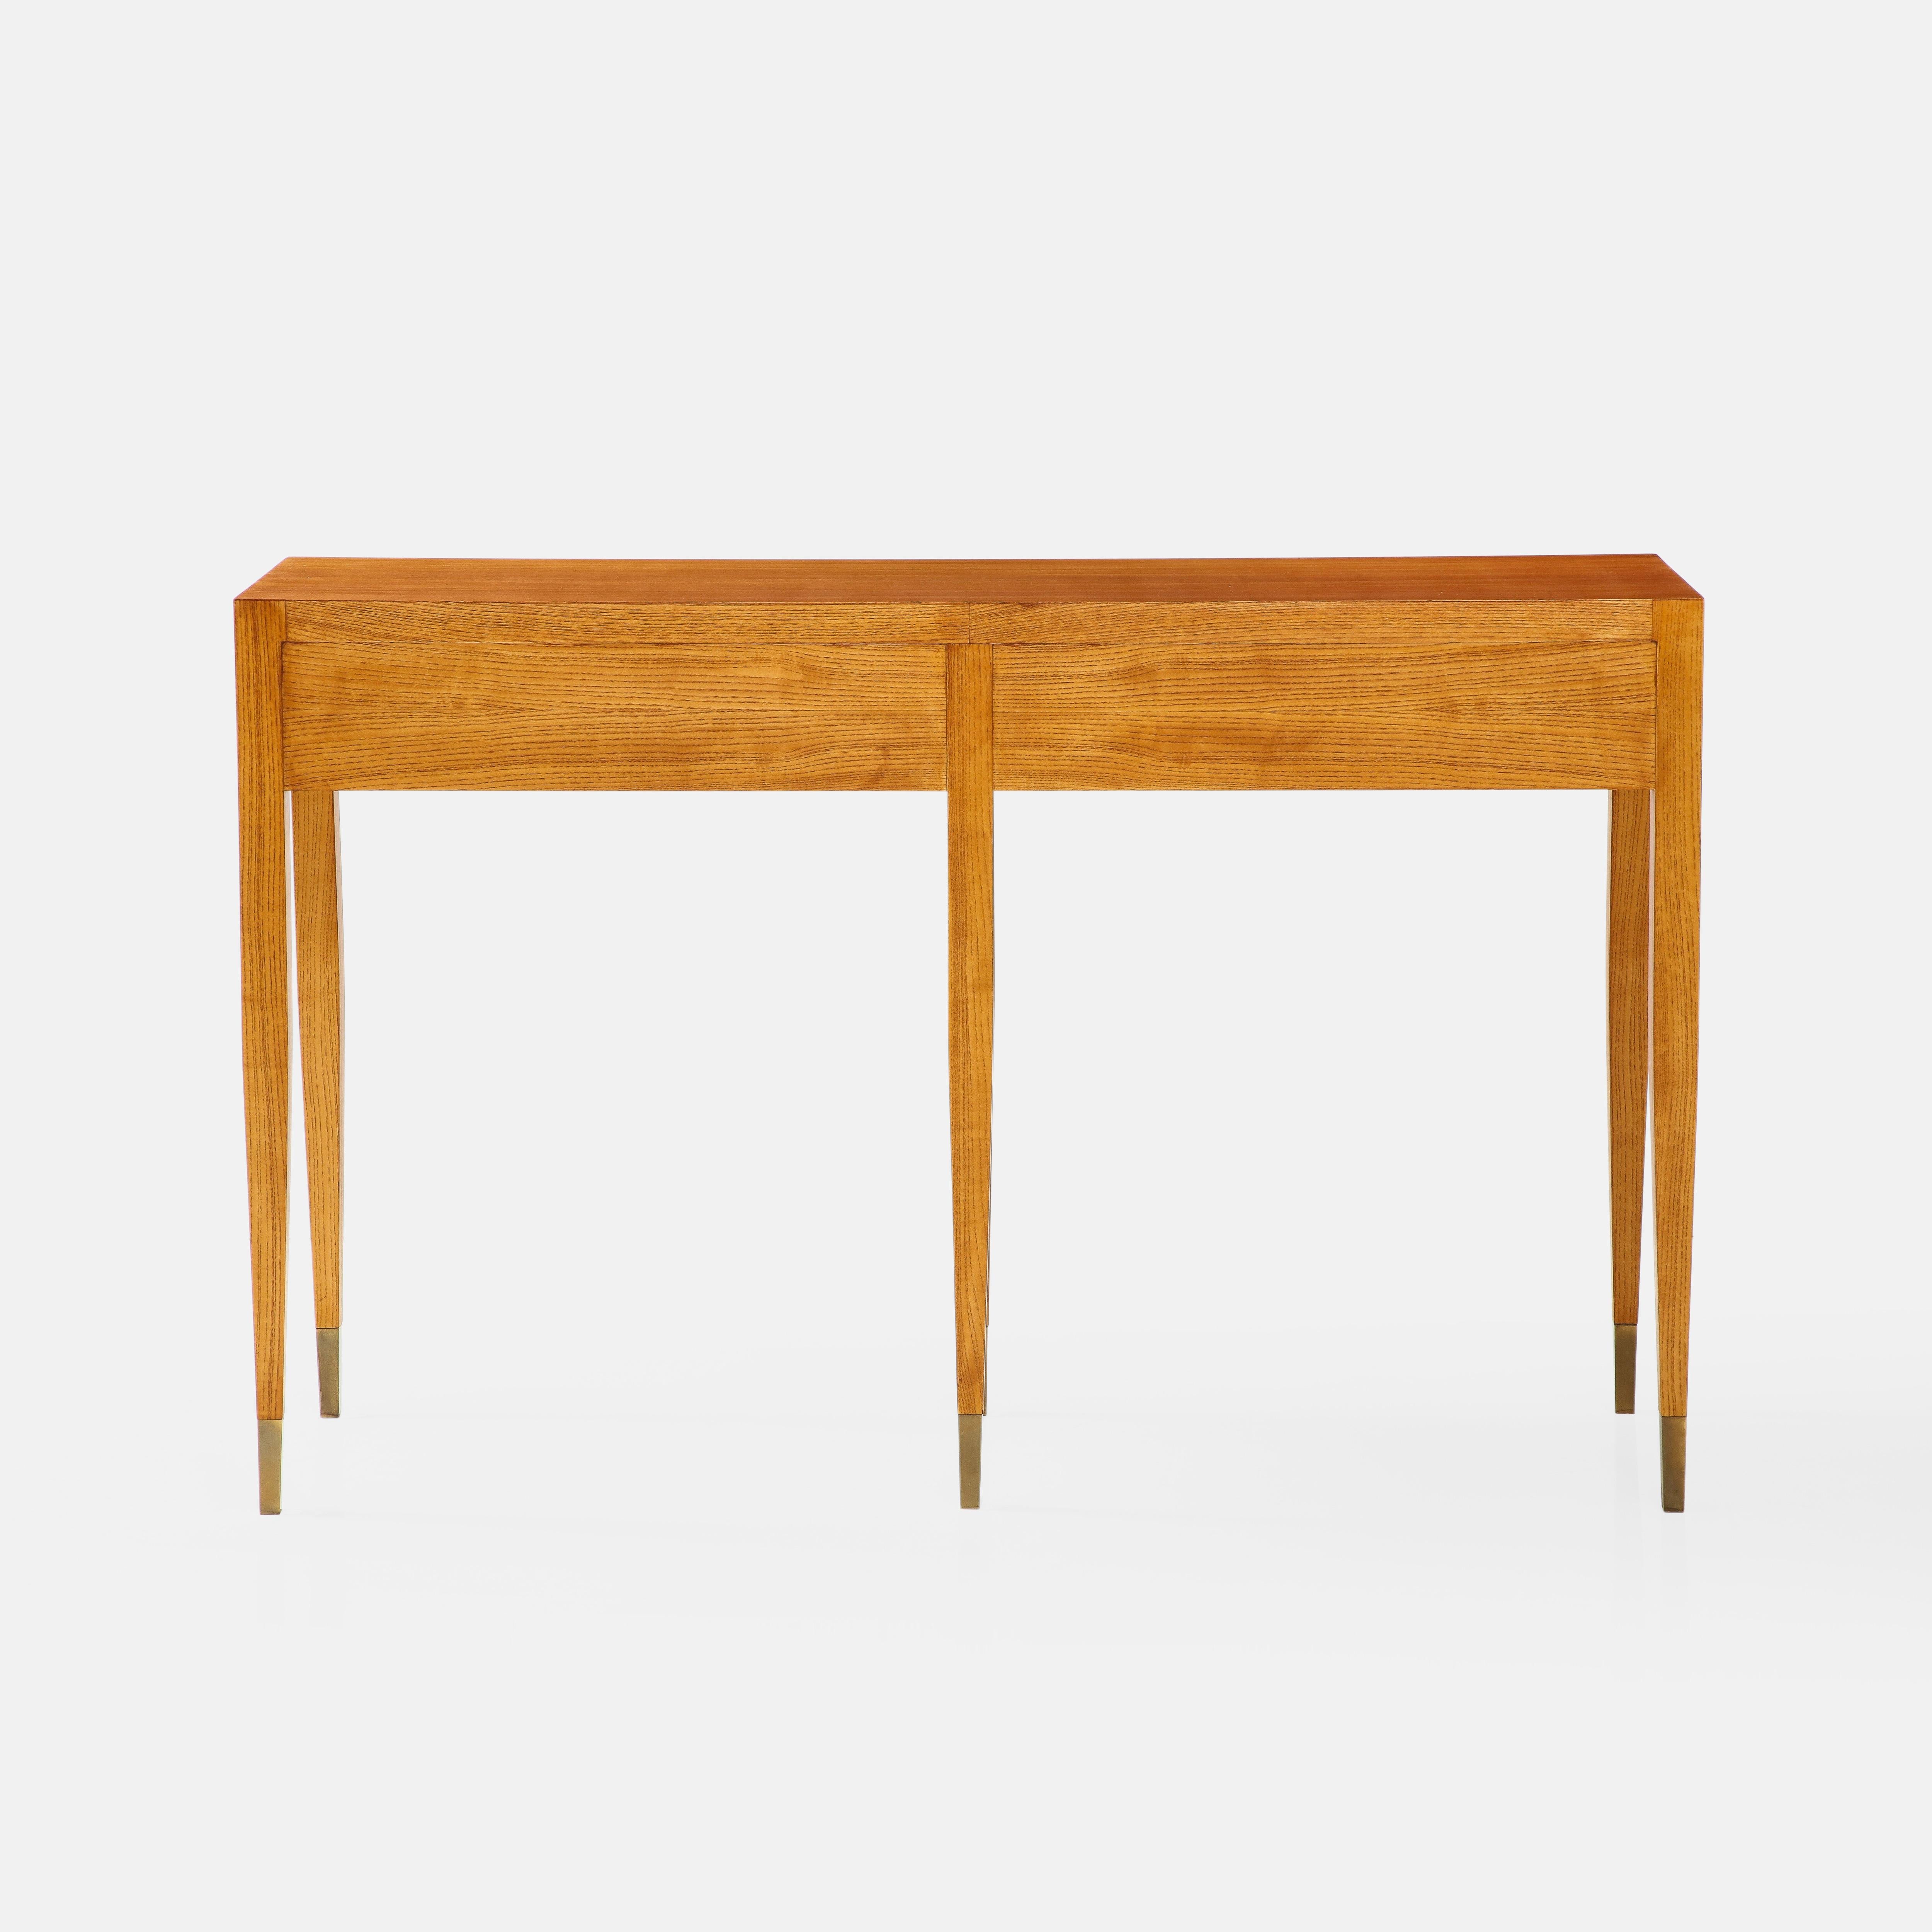 Gio Ponti for Giordano Chiesa Rare Pair of Ash Wood Consoles, Italy, 1950s For Sale 10